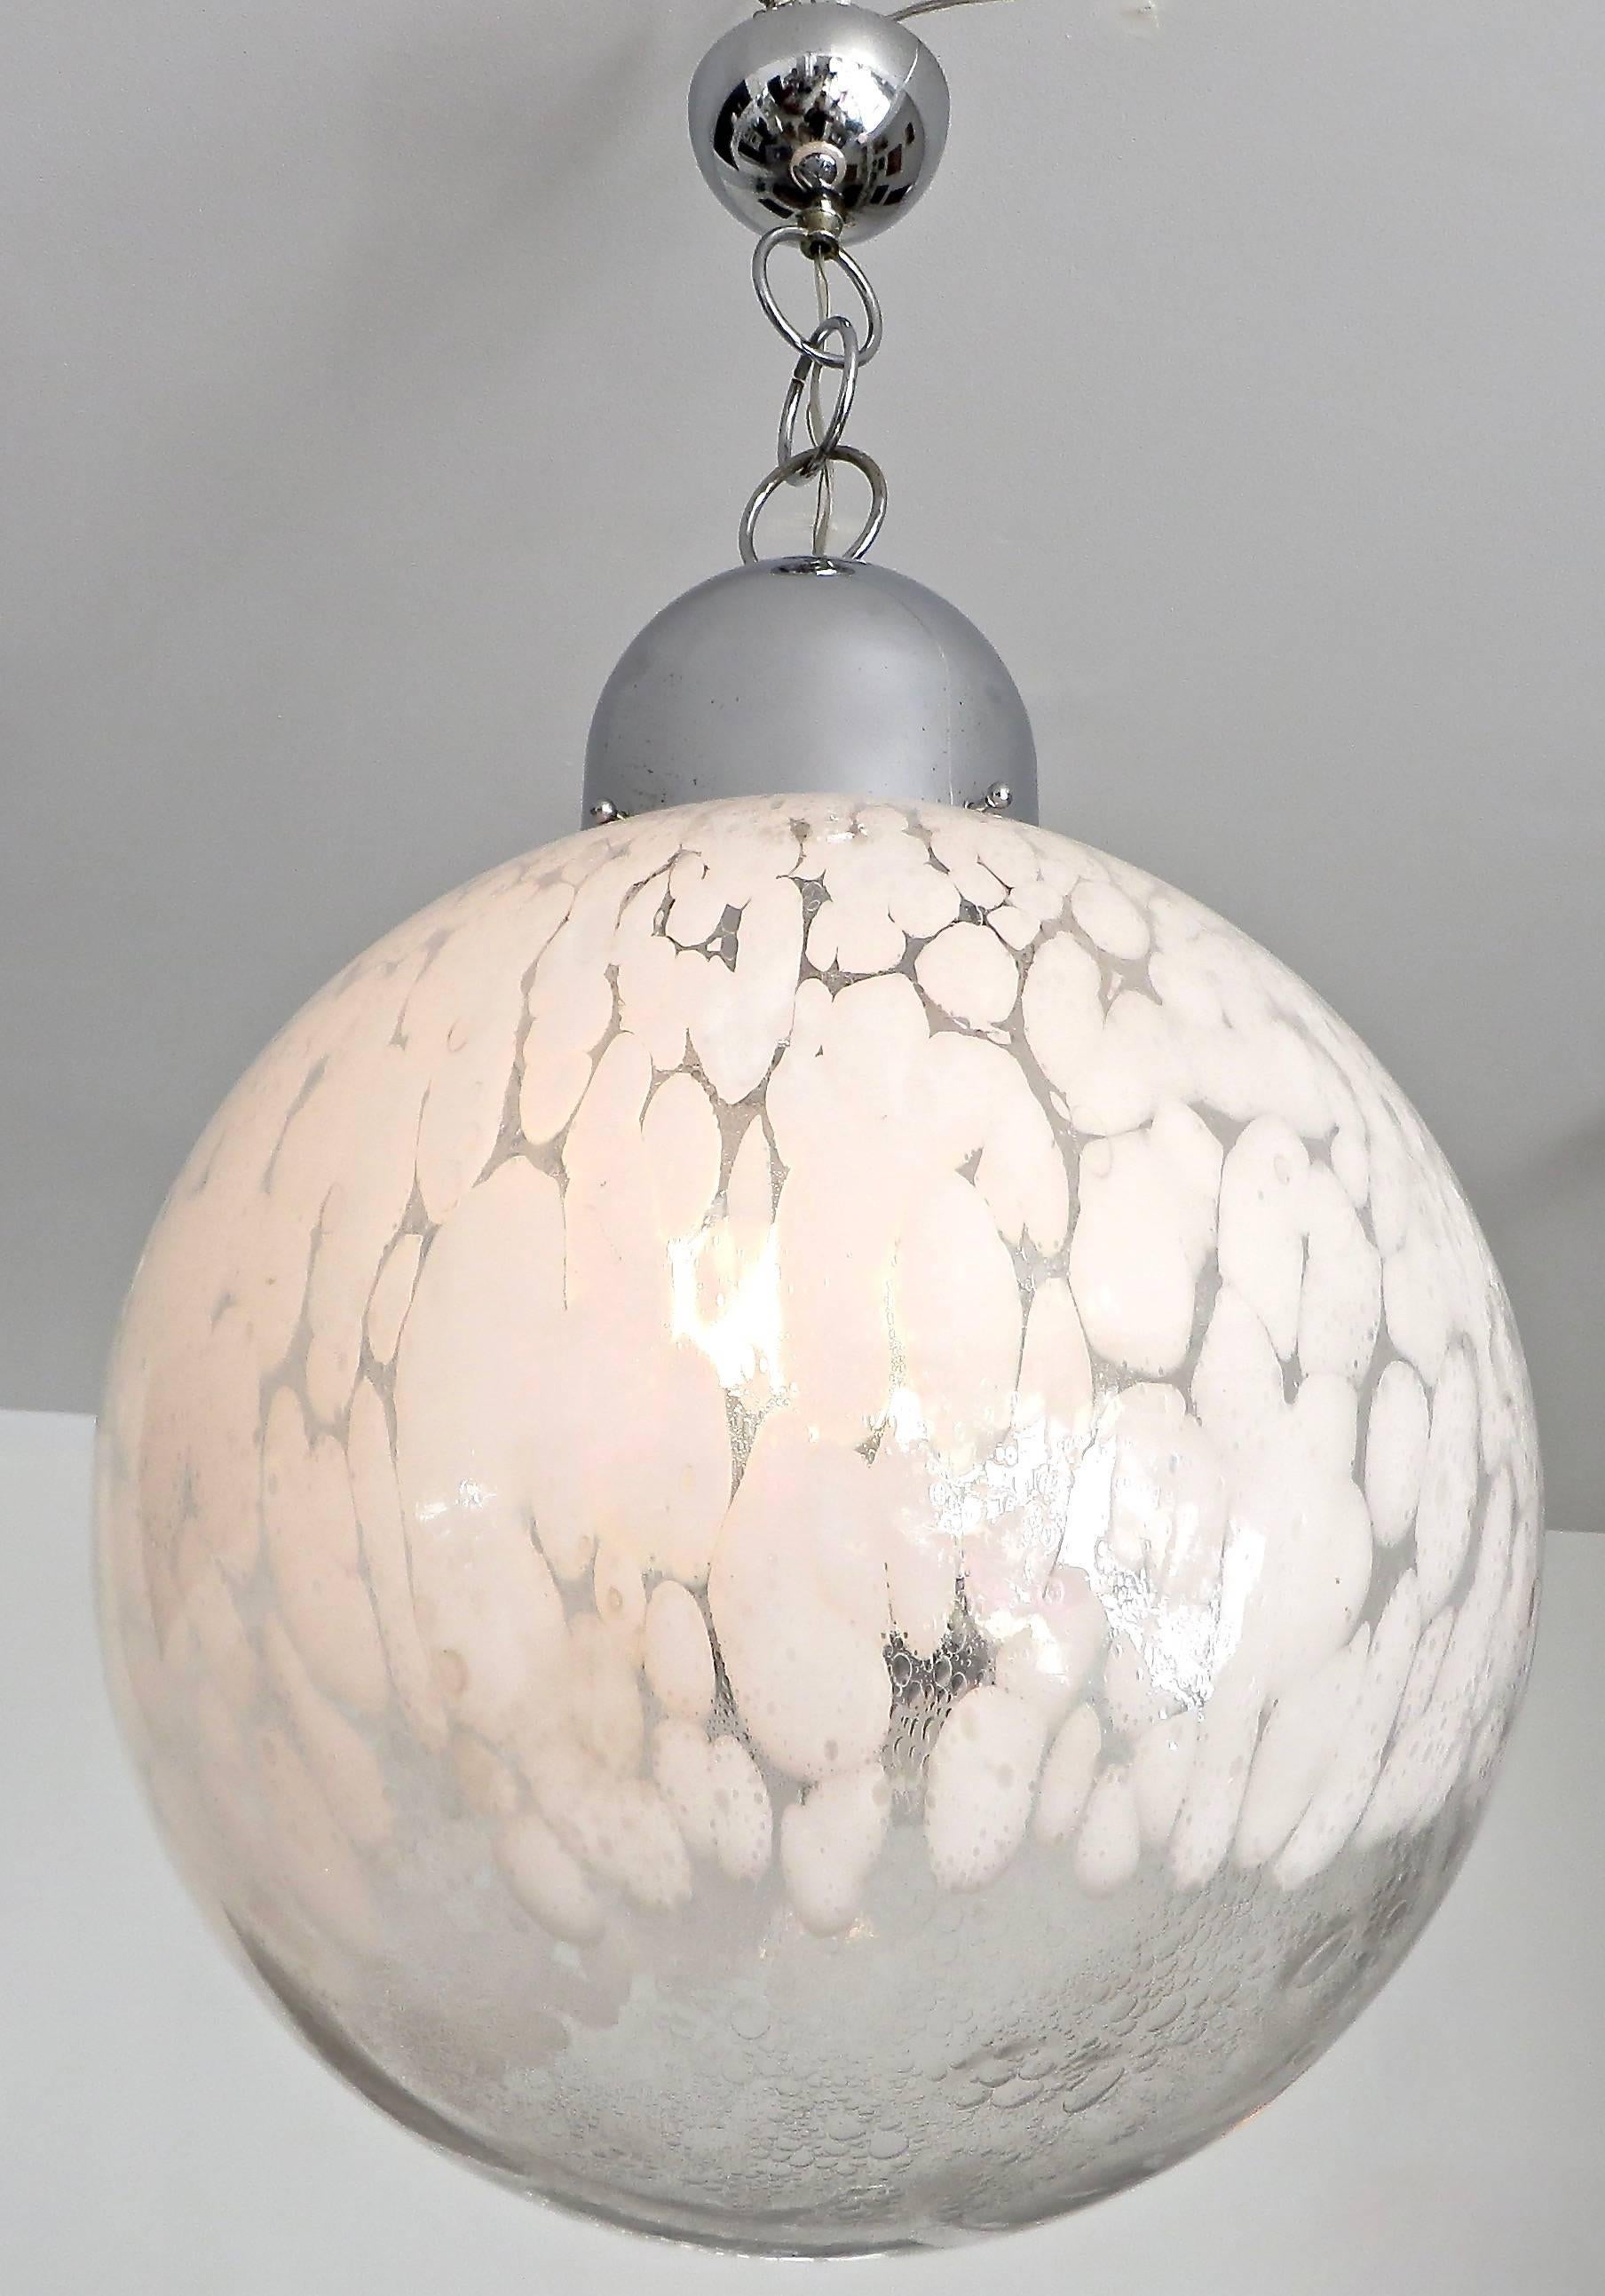 A Murano Mazzega large globe pendant chandelier in clear and white mottled blown glass. The Murano glass has a bubble effect encased in the glass.
Perfect condition with no chips.
The interior socket has 3 bulbs but could be rewired to suit with